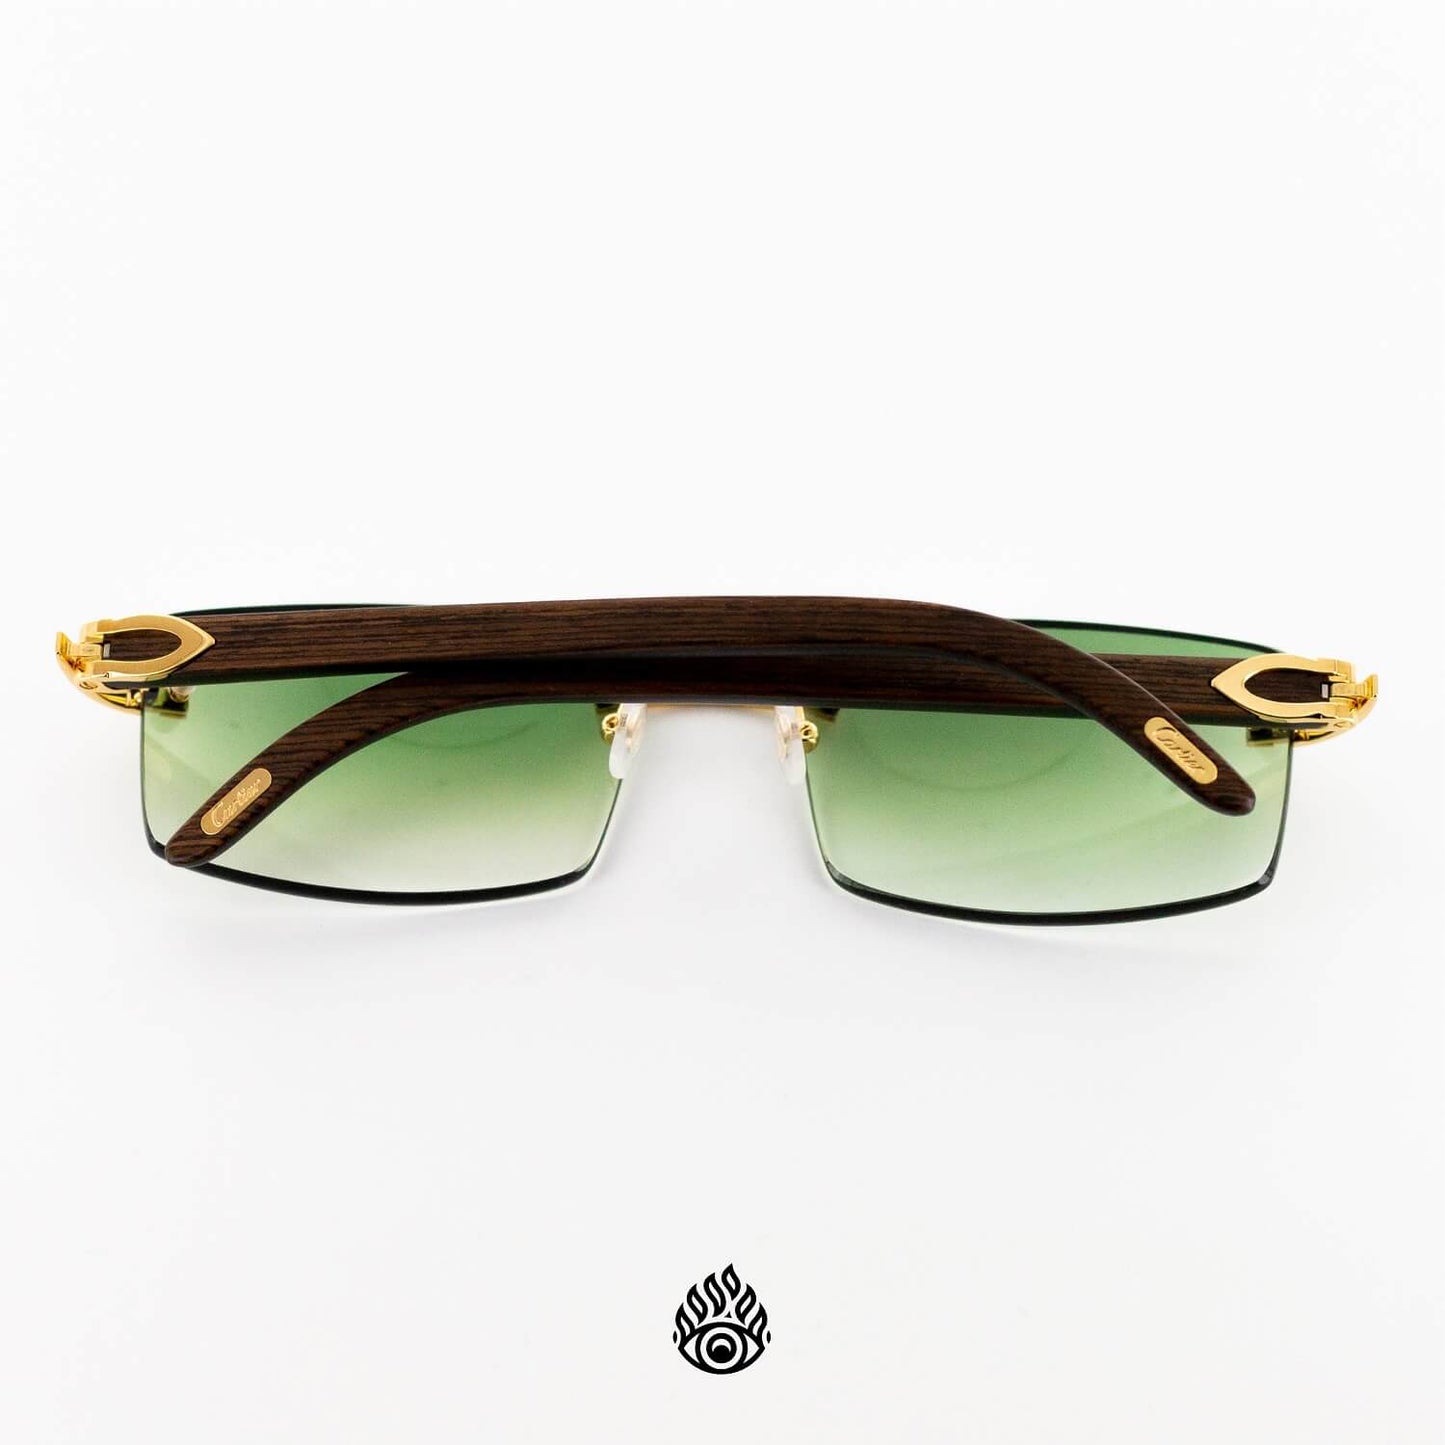 Cartier Dark Wood Glasses with Gold C Decor and Green Lens